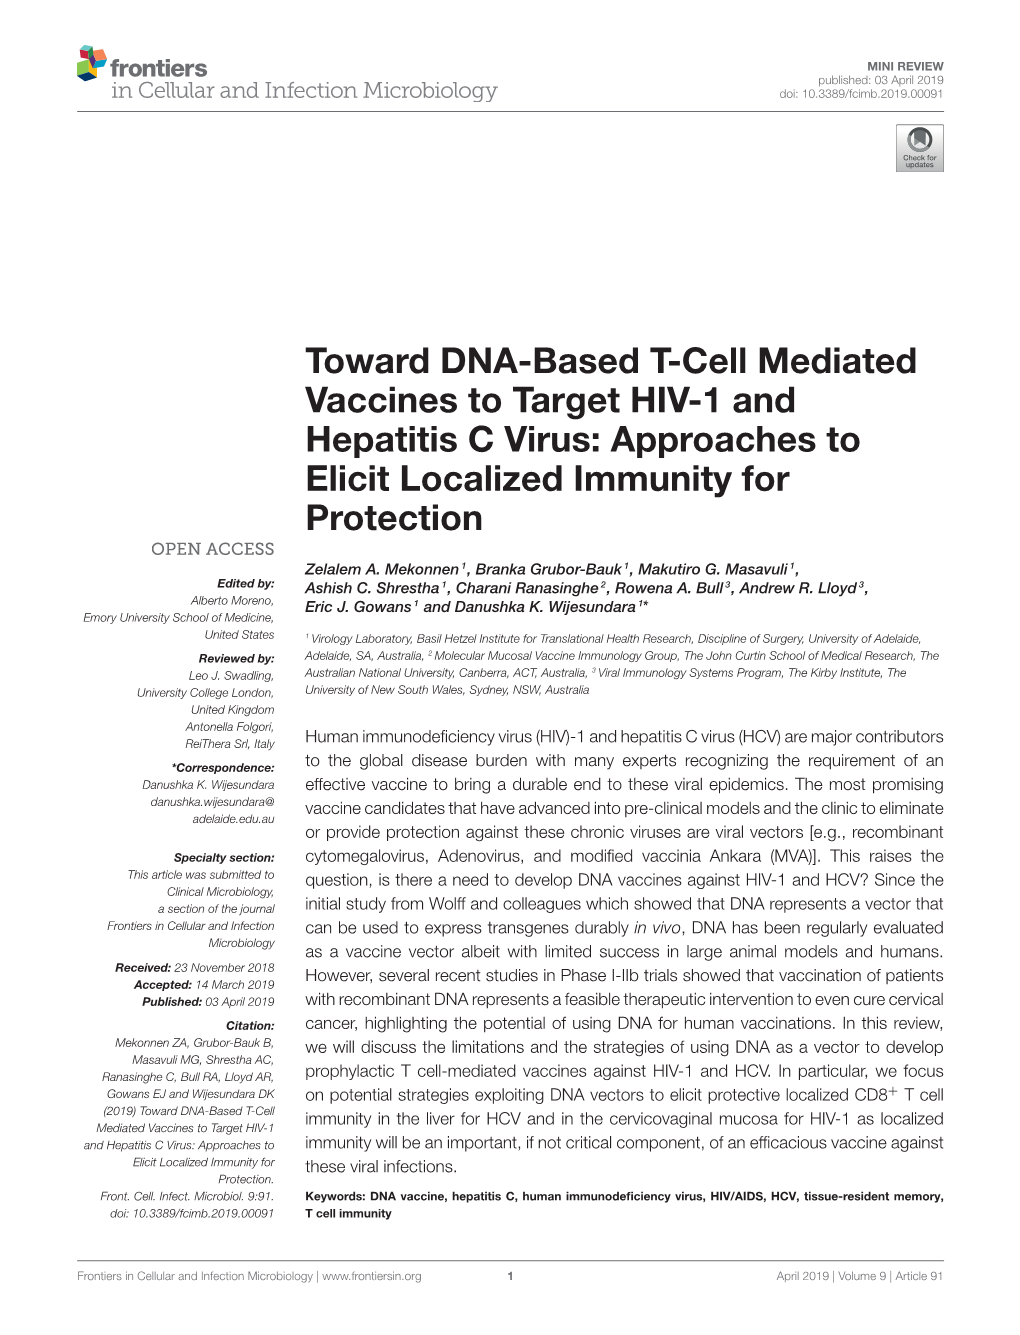 Toward DNA-Based T-Cell Mediated Vaccines to Target HIV-1 and Hepatitis C Virus: Approaches to Elicit Localized Immunity for Protection